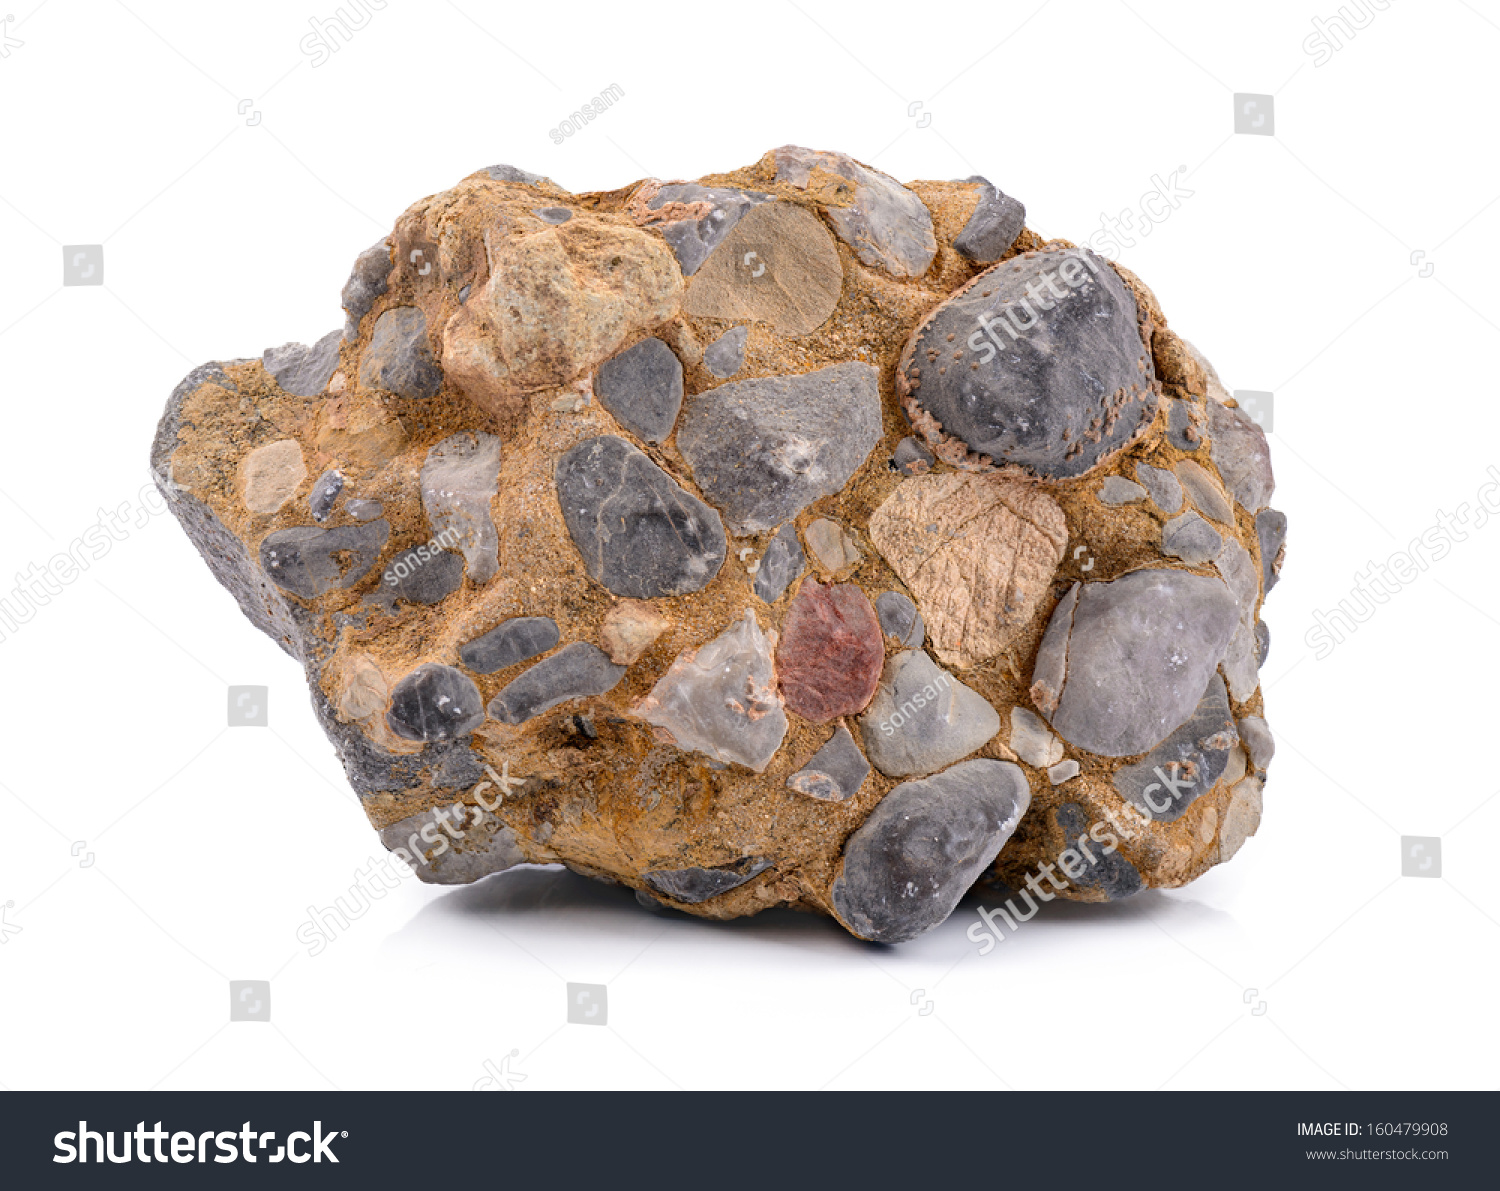 Conglomerate Close-up of a conglomerate stone isolated on white. #160479908